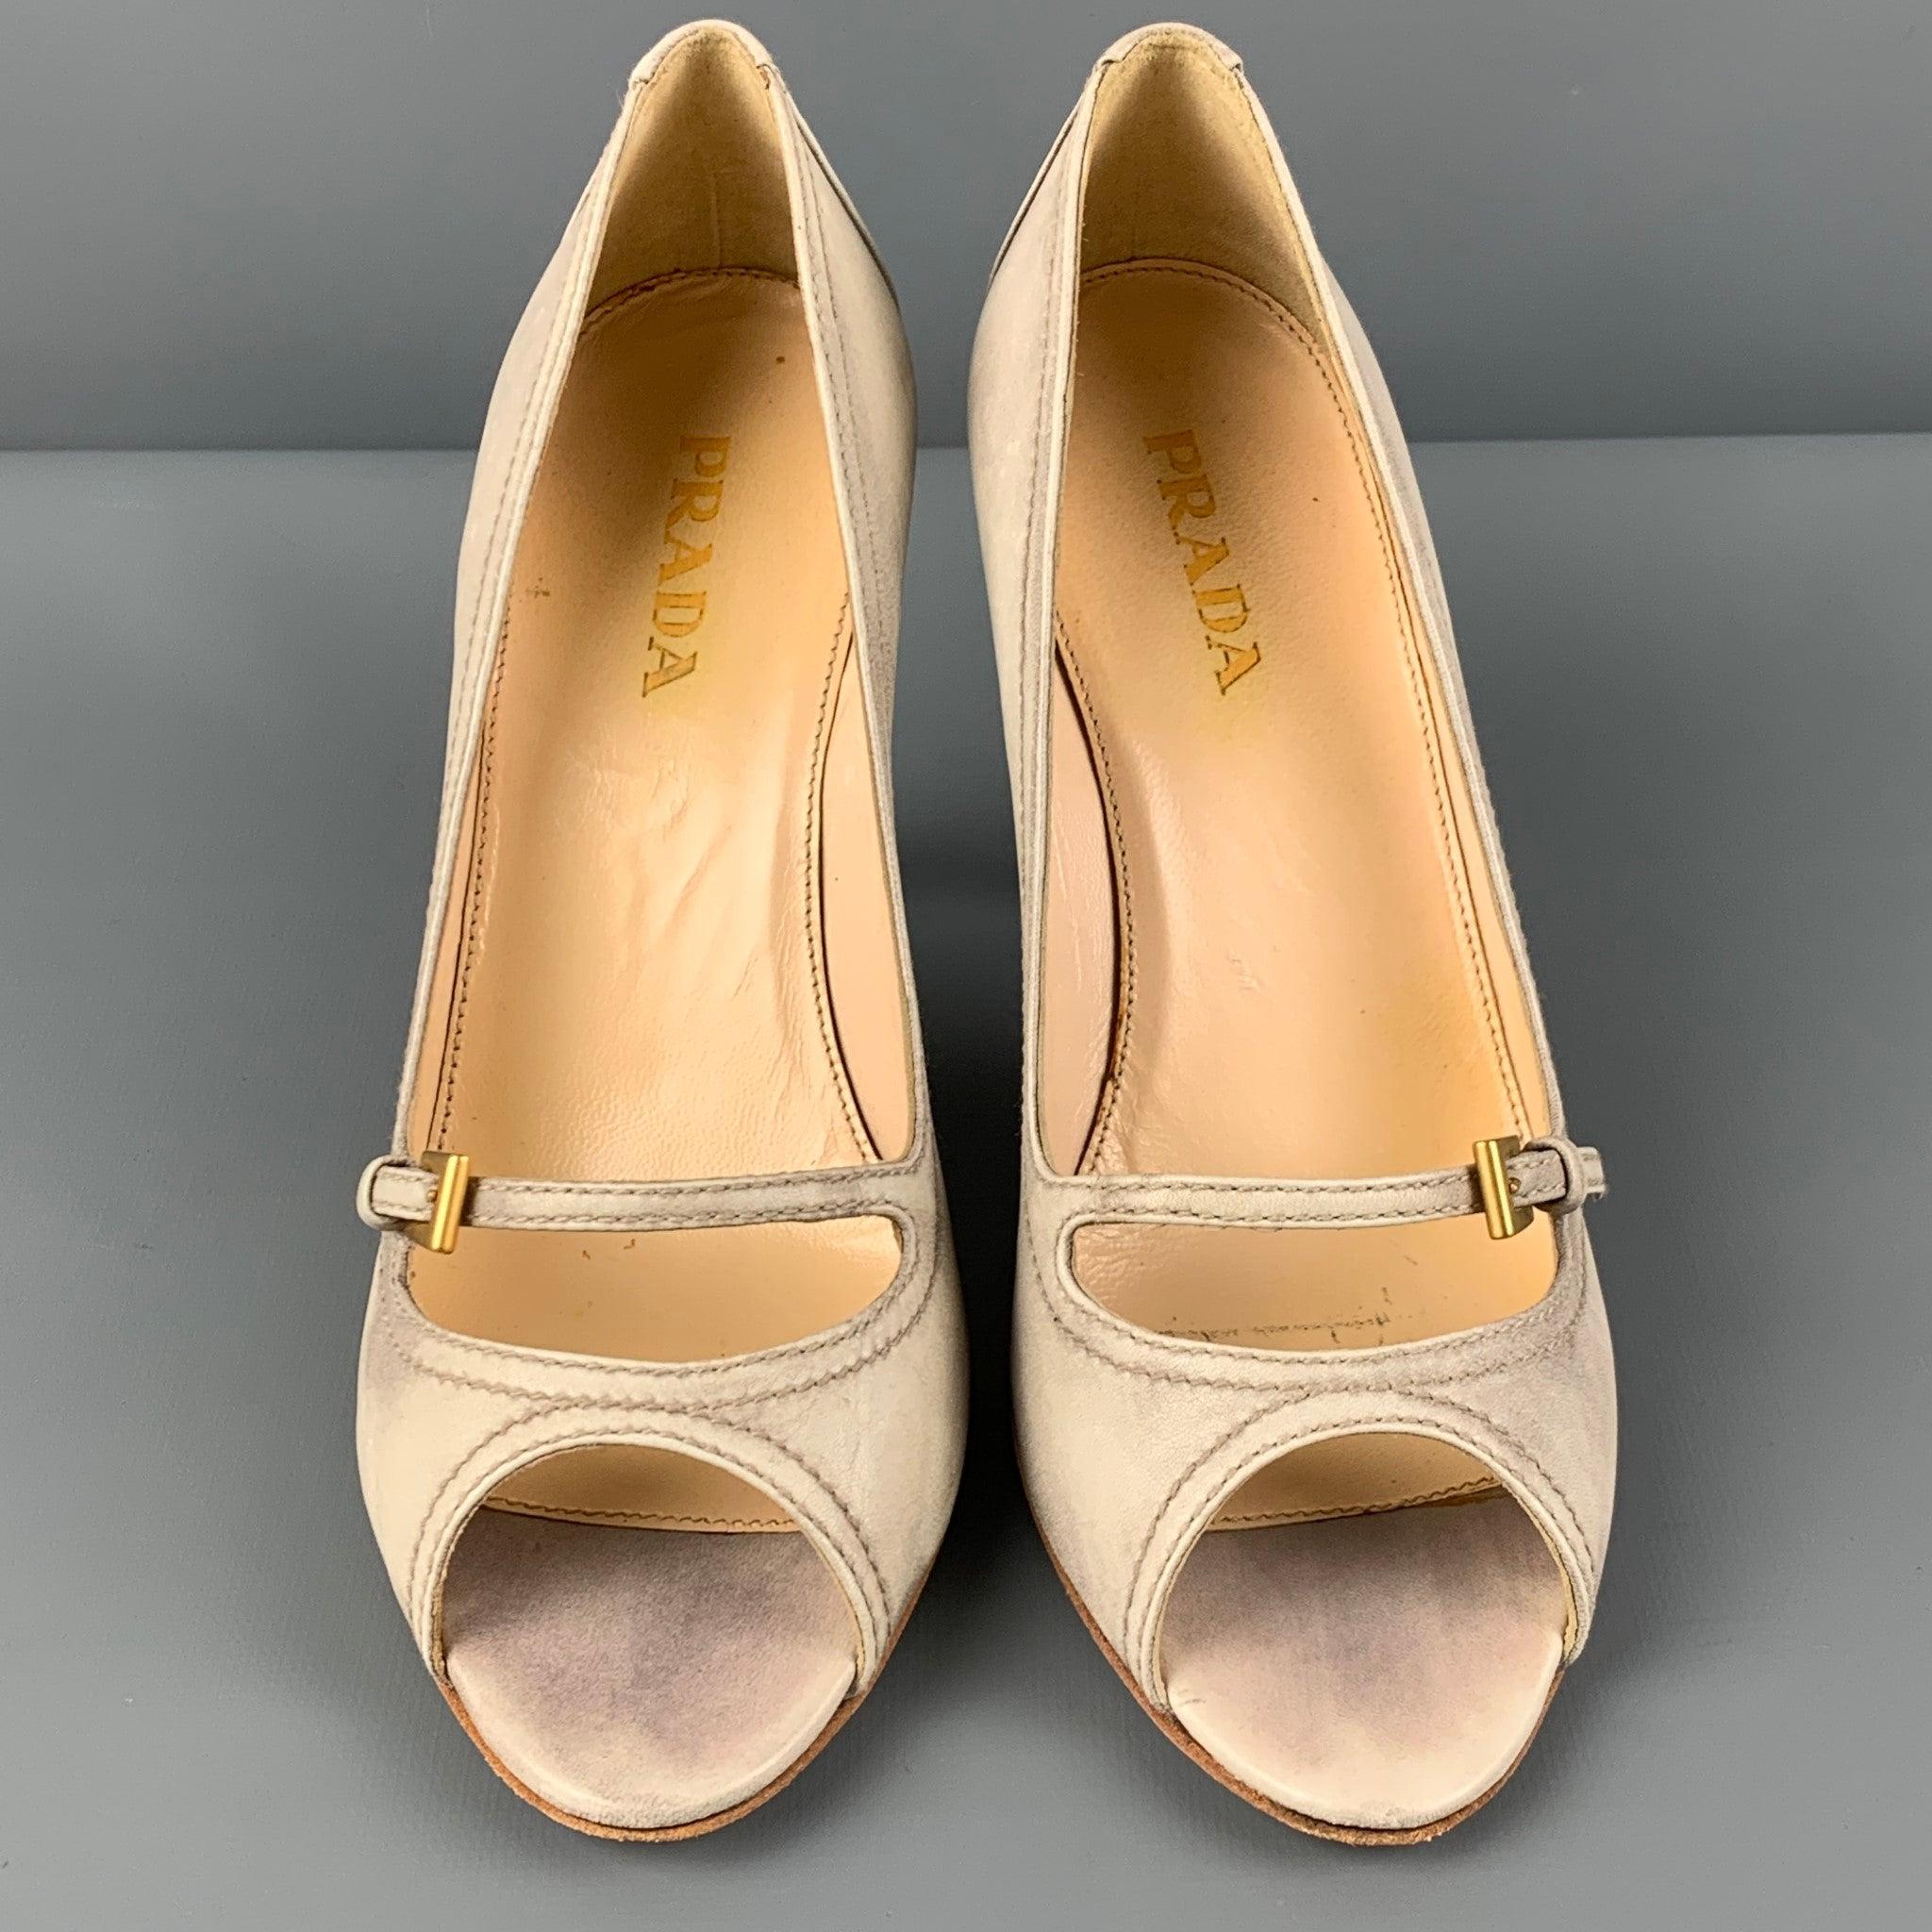 Women's PRADA Size 7 Beige Leather Marbled Peep Toe Pumps For Sale